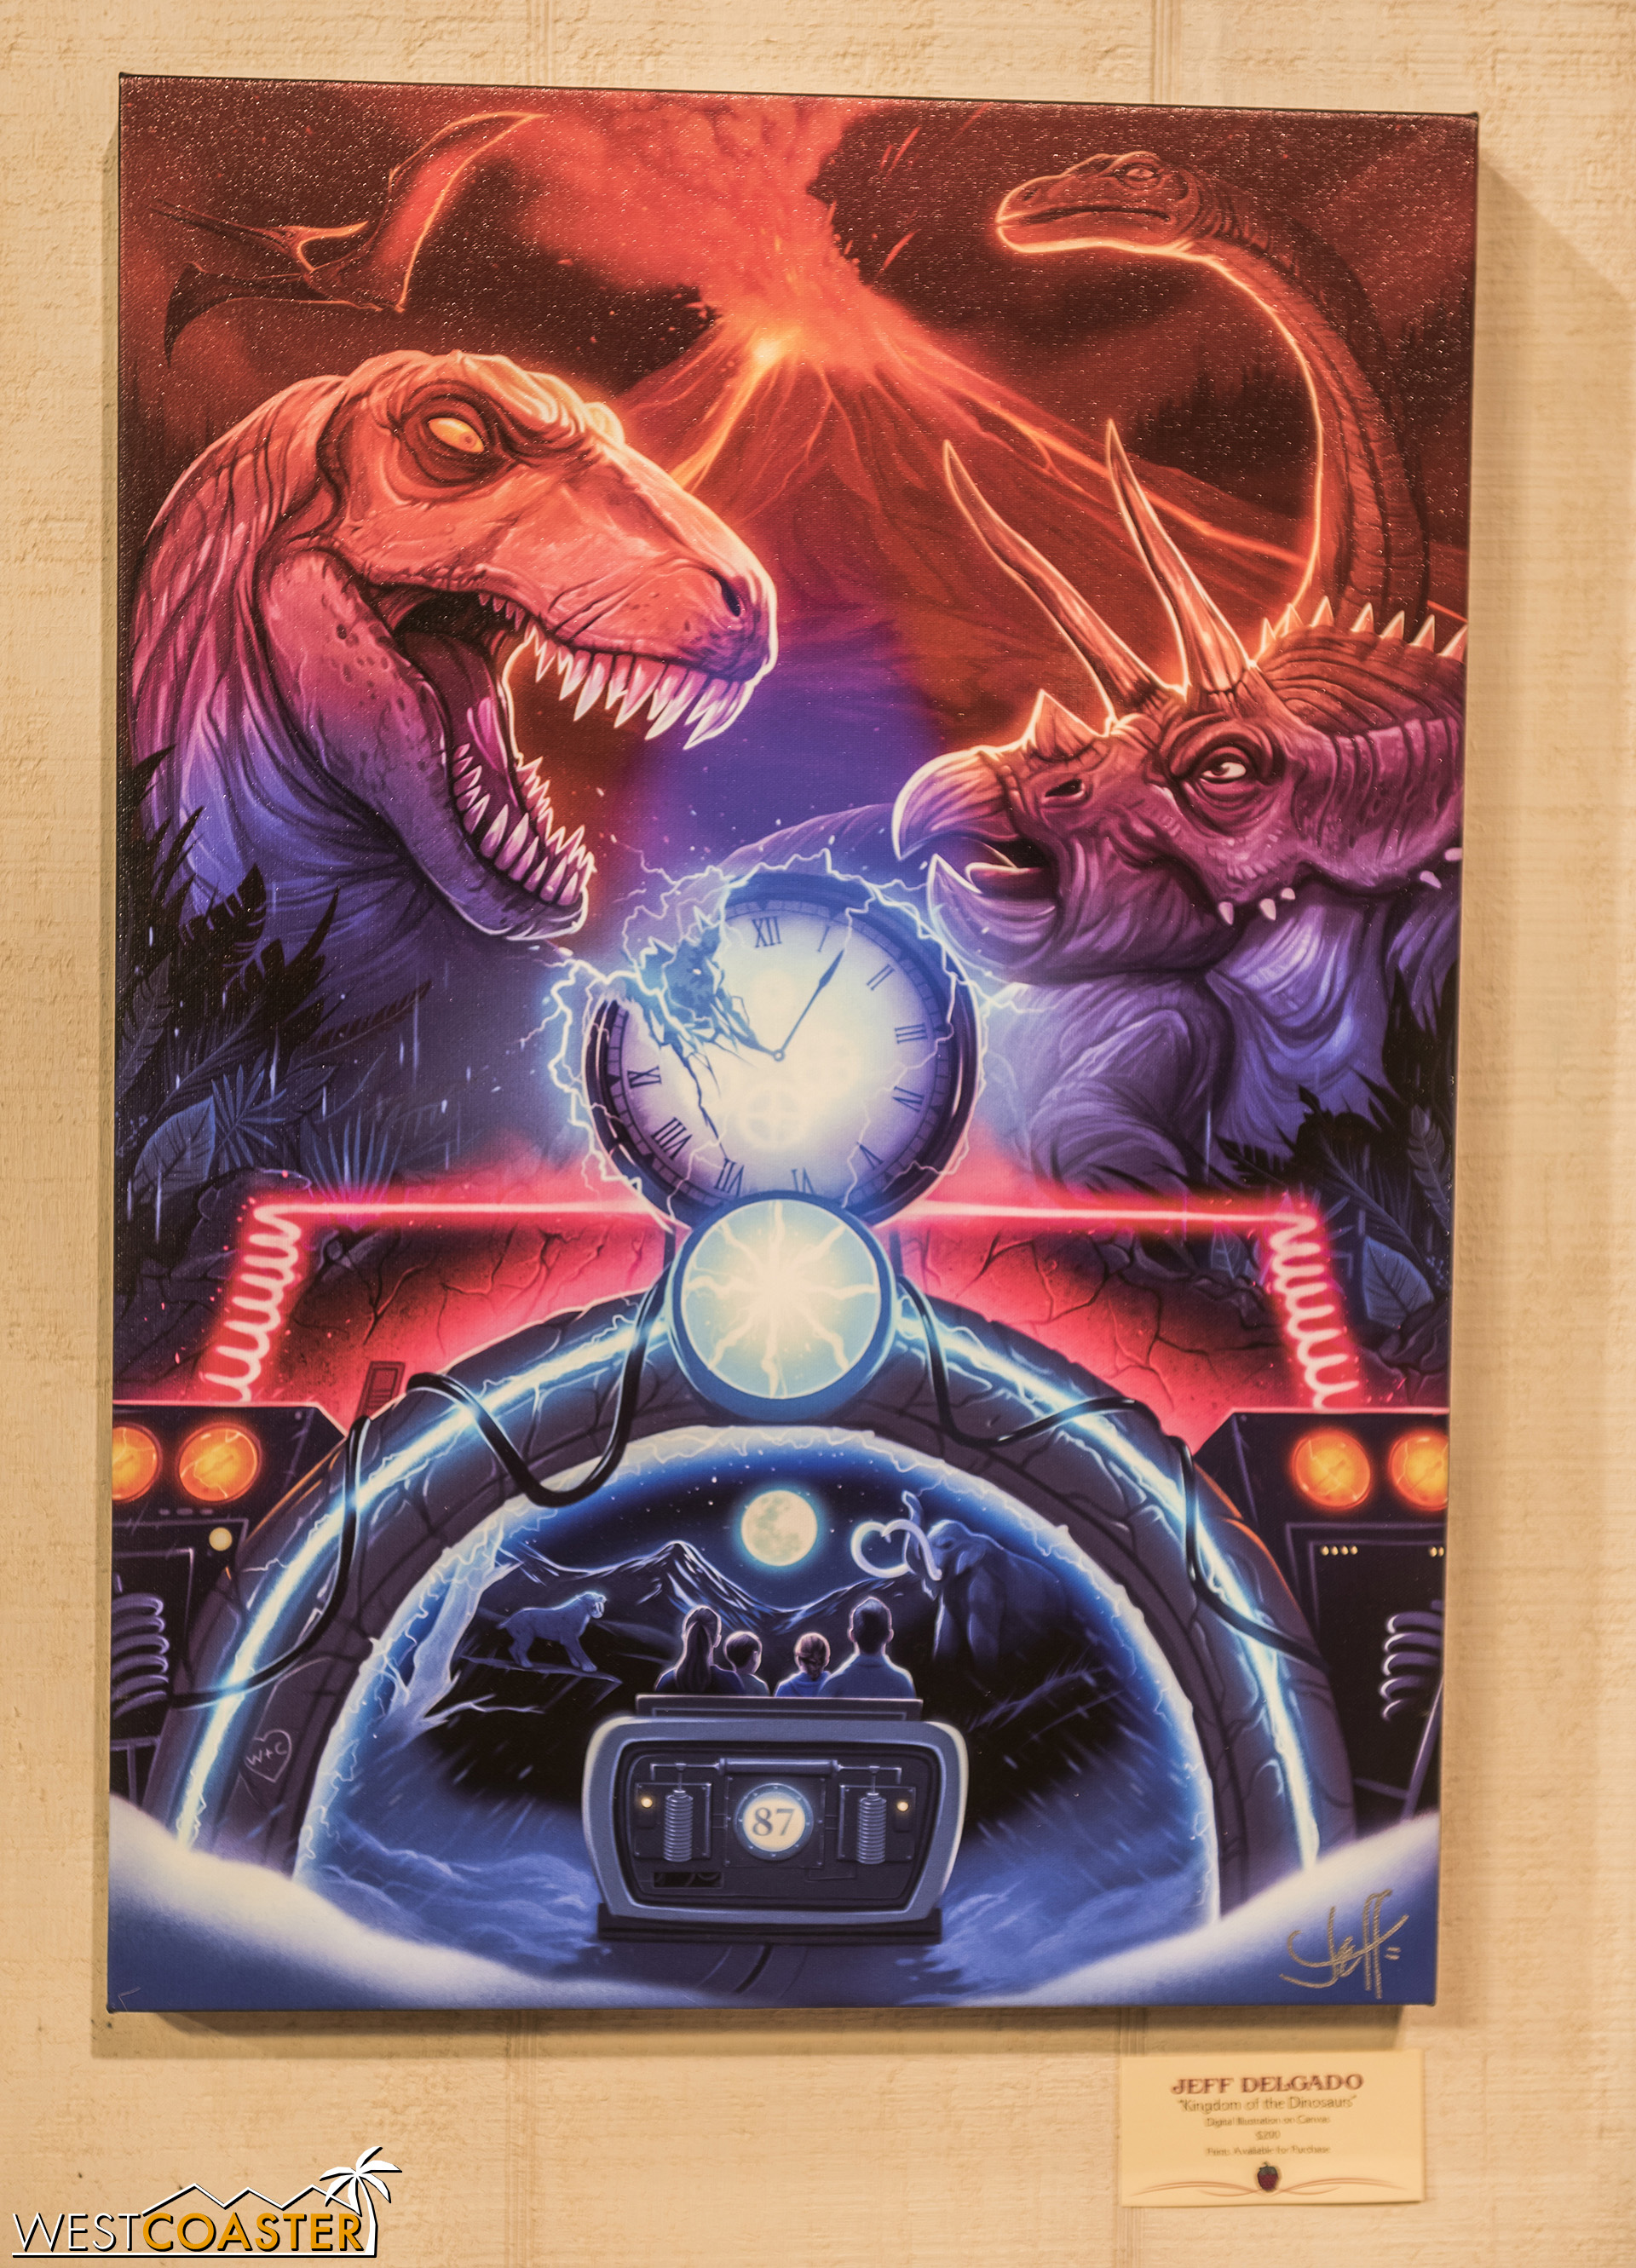  I love the almost 80’s-esque vibe of this painting of the departed Kingdom of the Dinosaurs! 